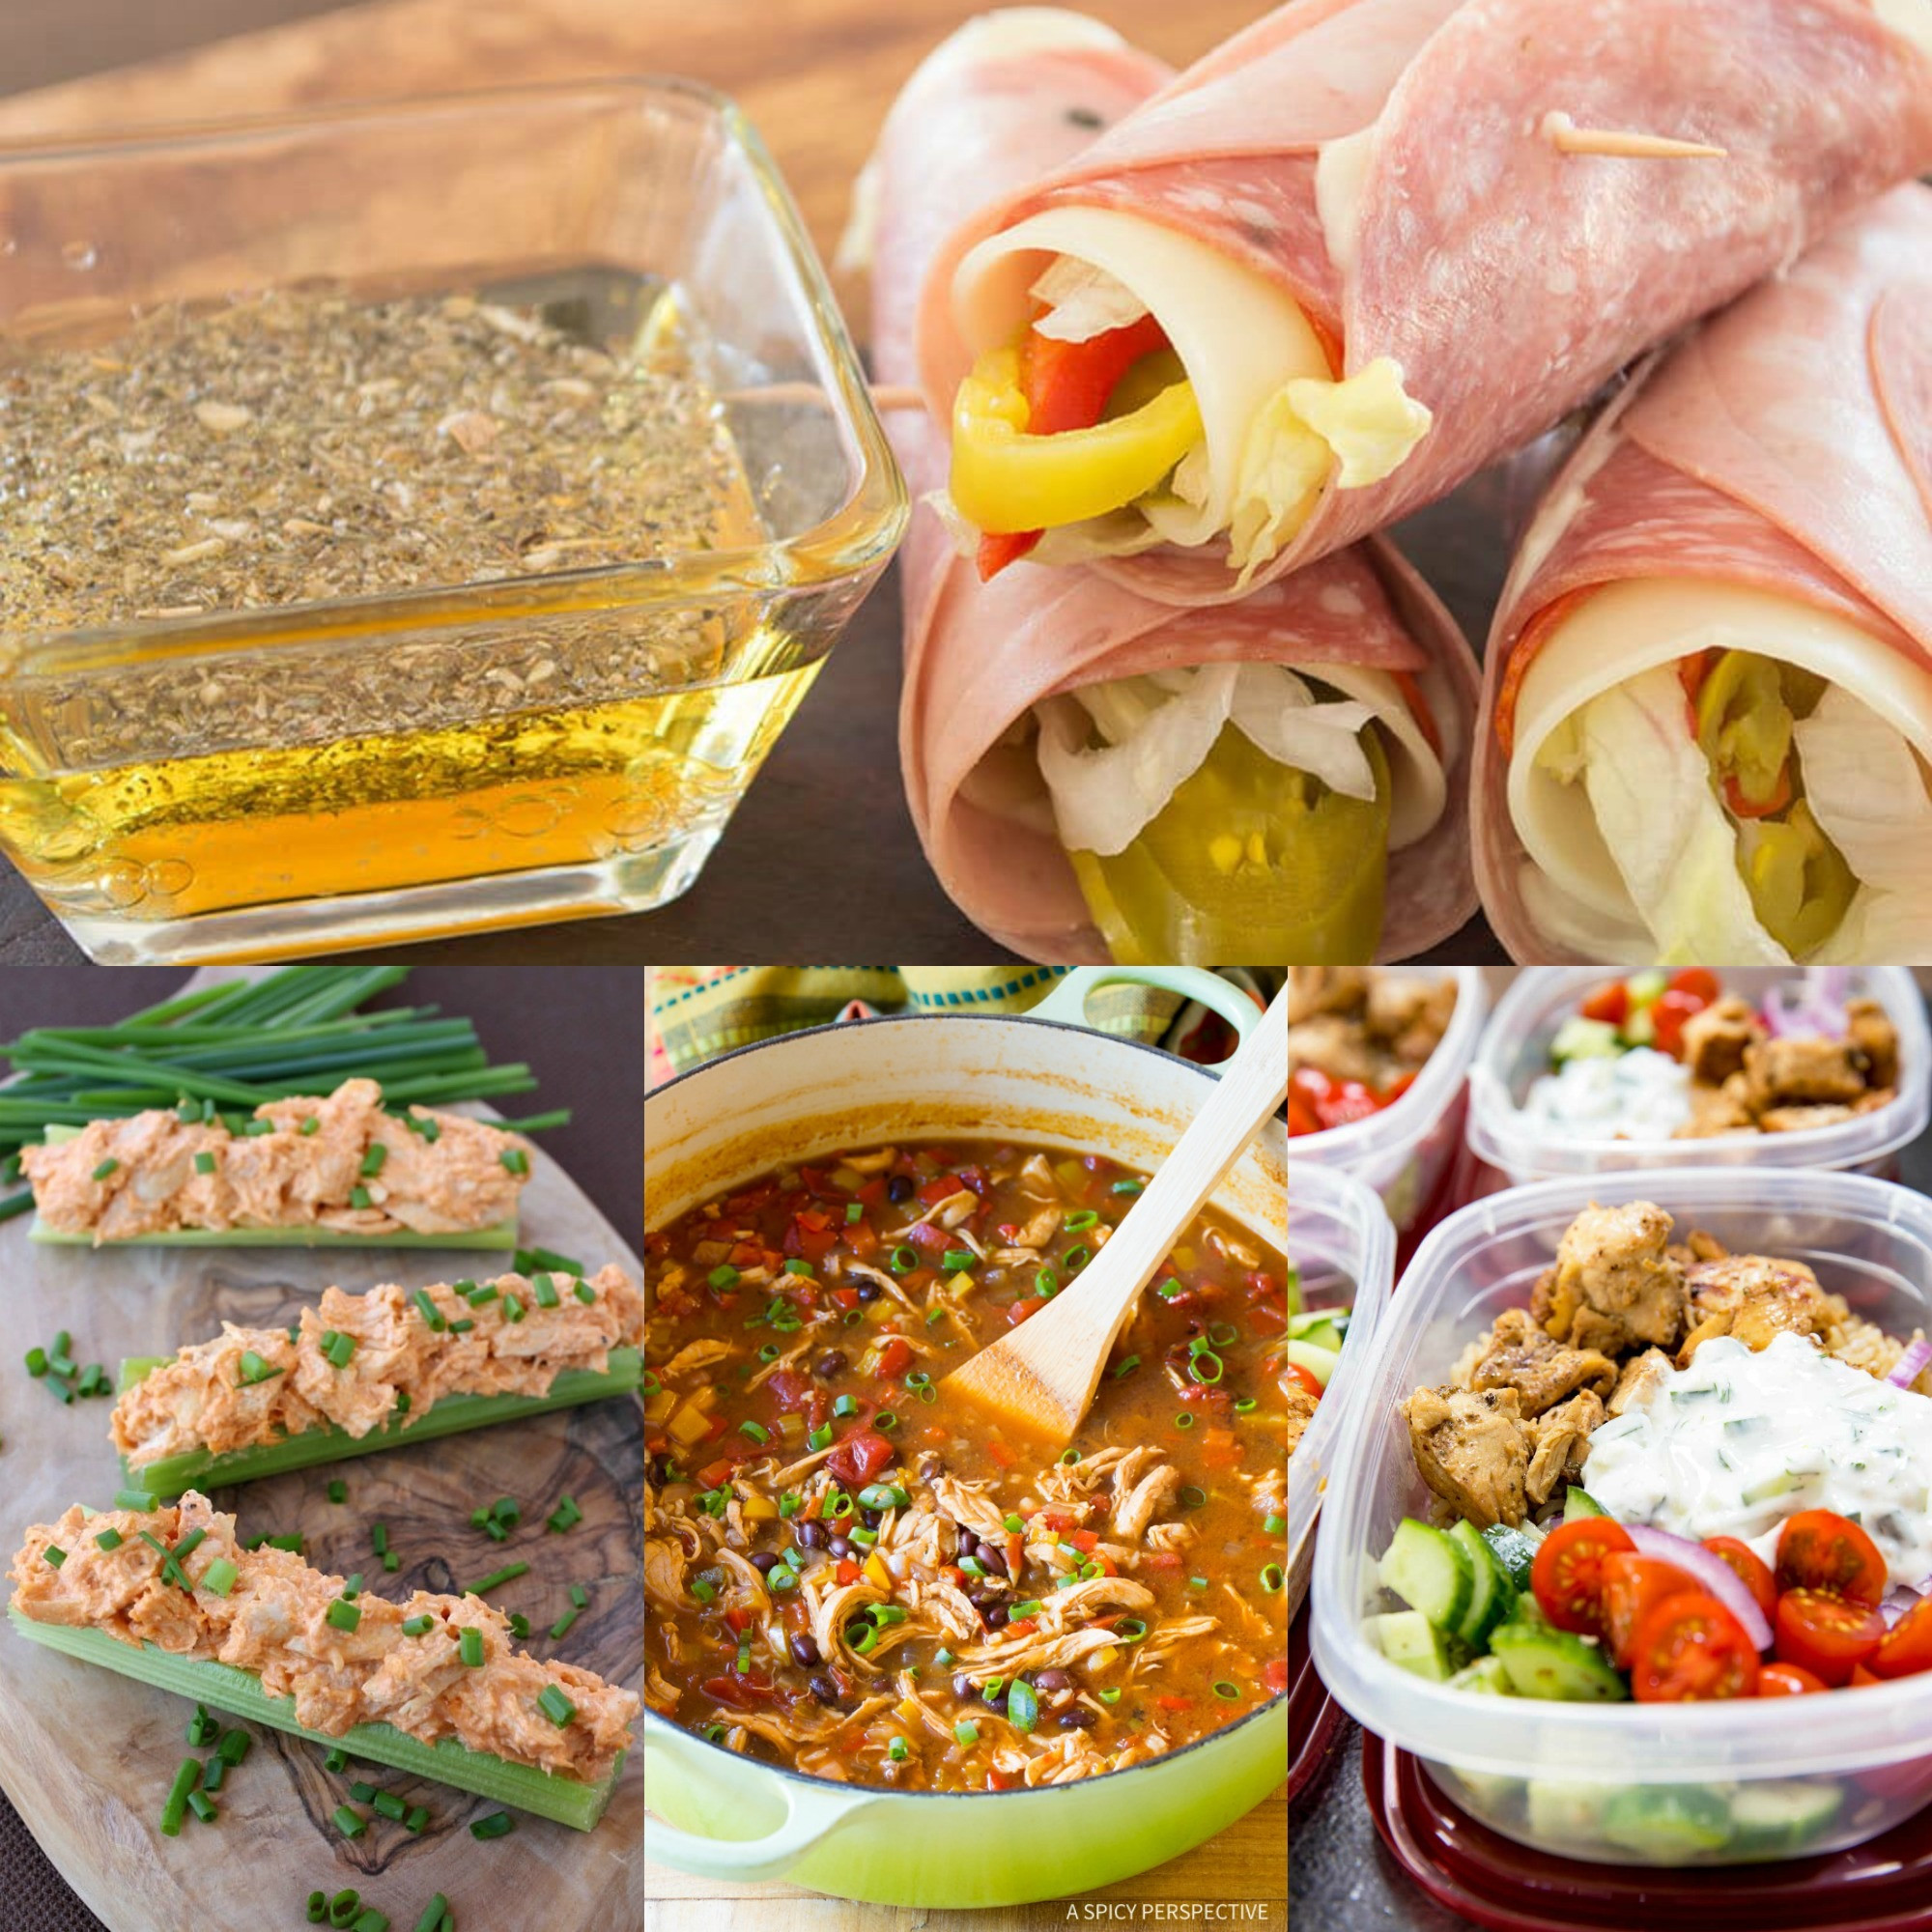 Keto Diet Recipies
 A Week of Keto Recipes That Taste Amazing And Help You